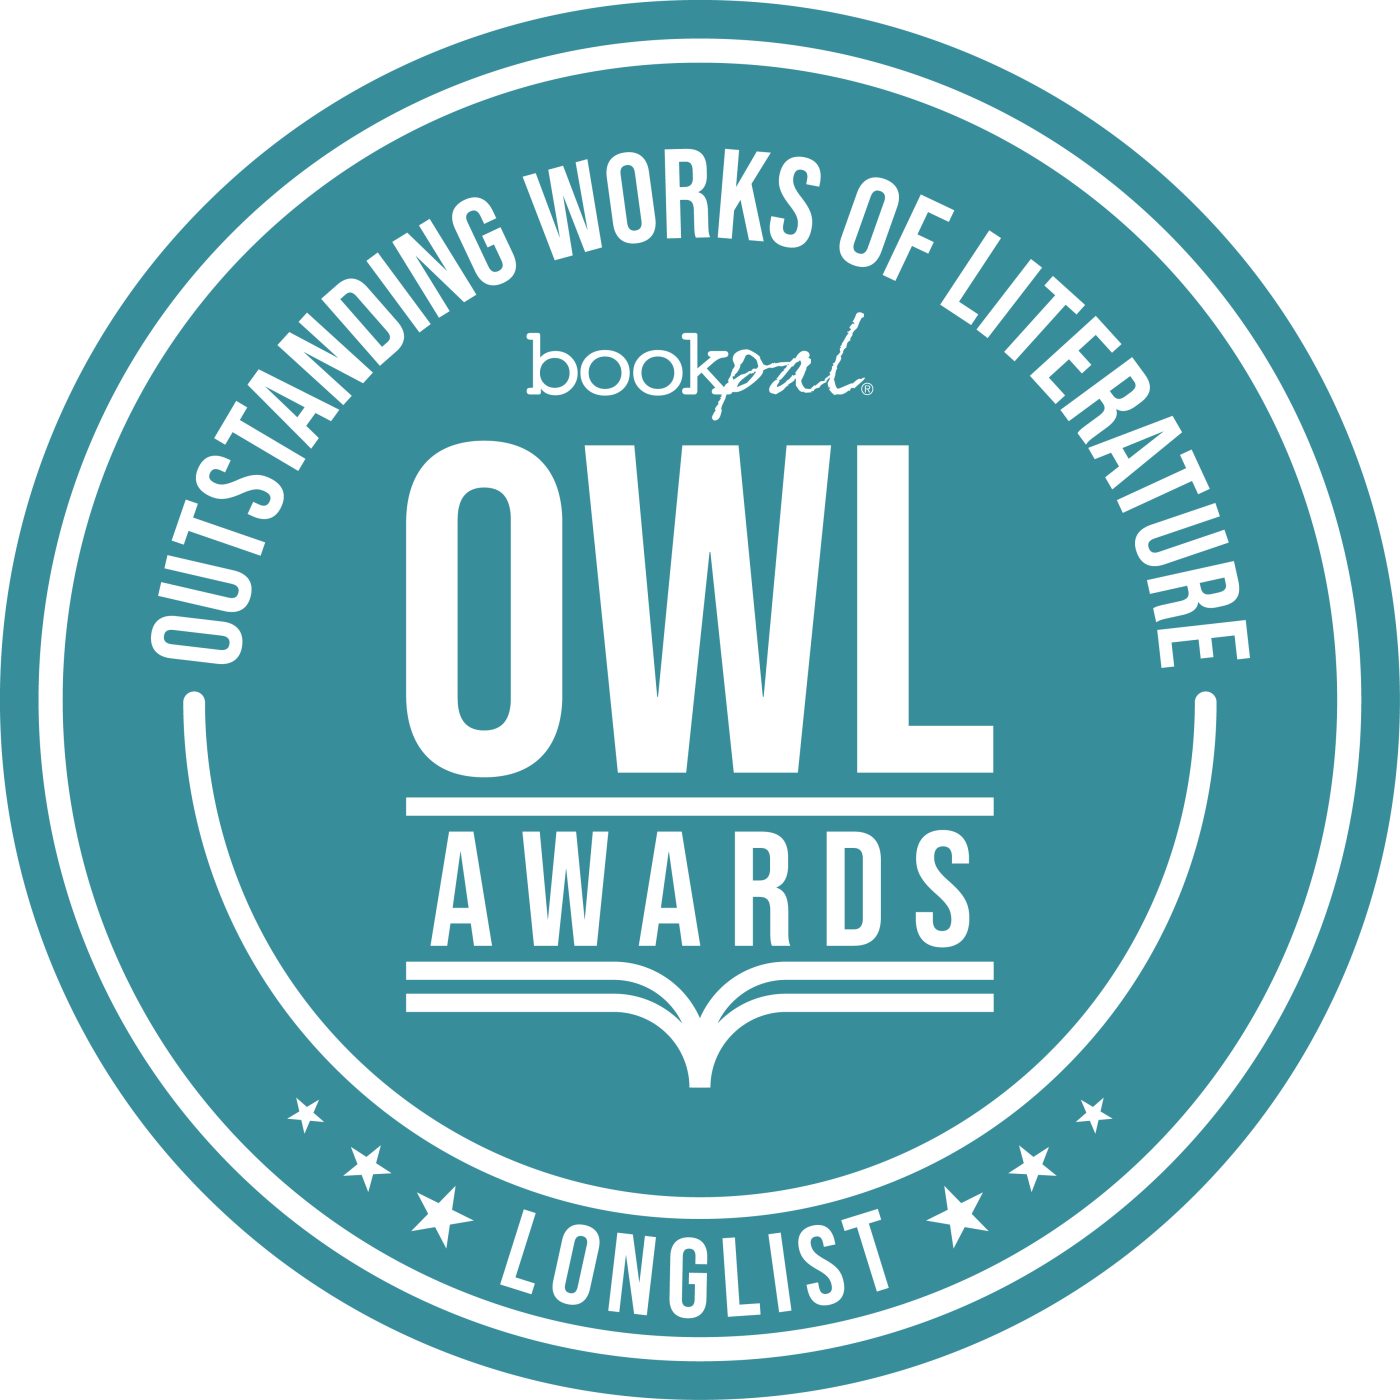 WELL AT WORK made the OWL Awards longlist